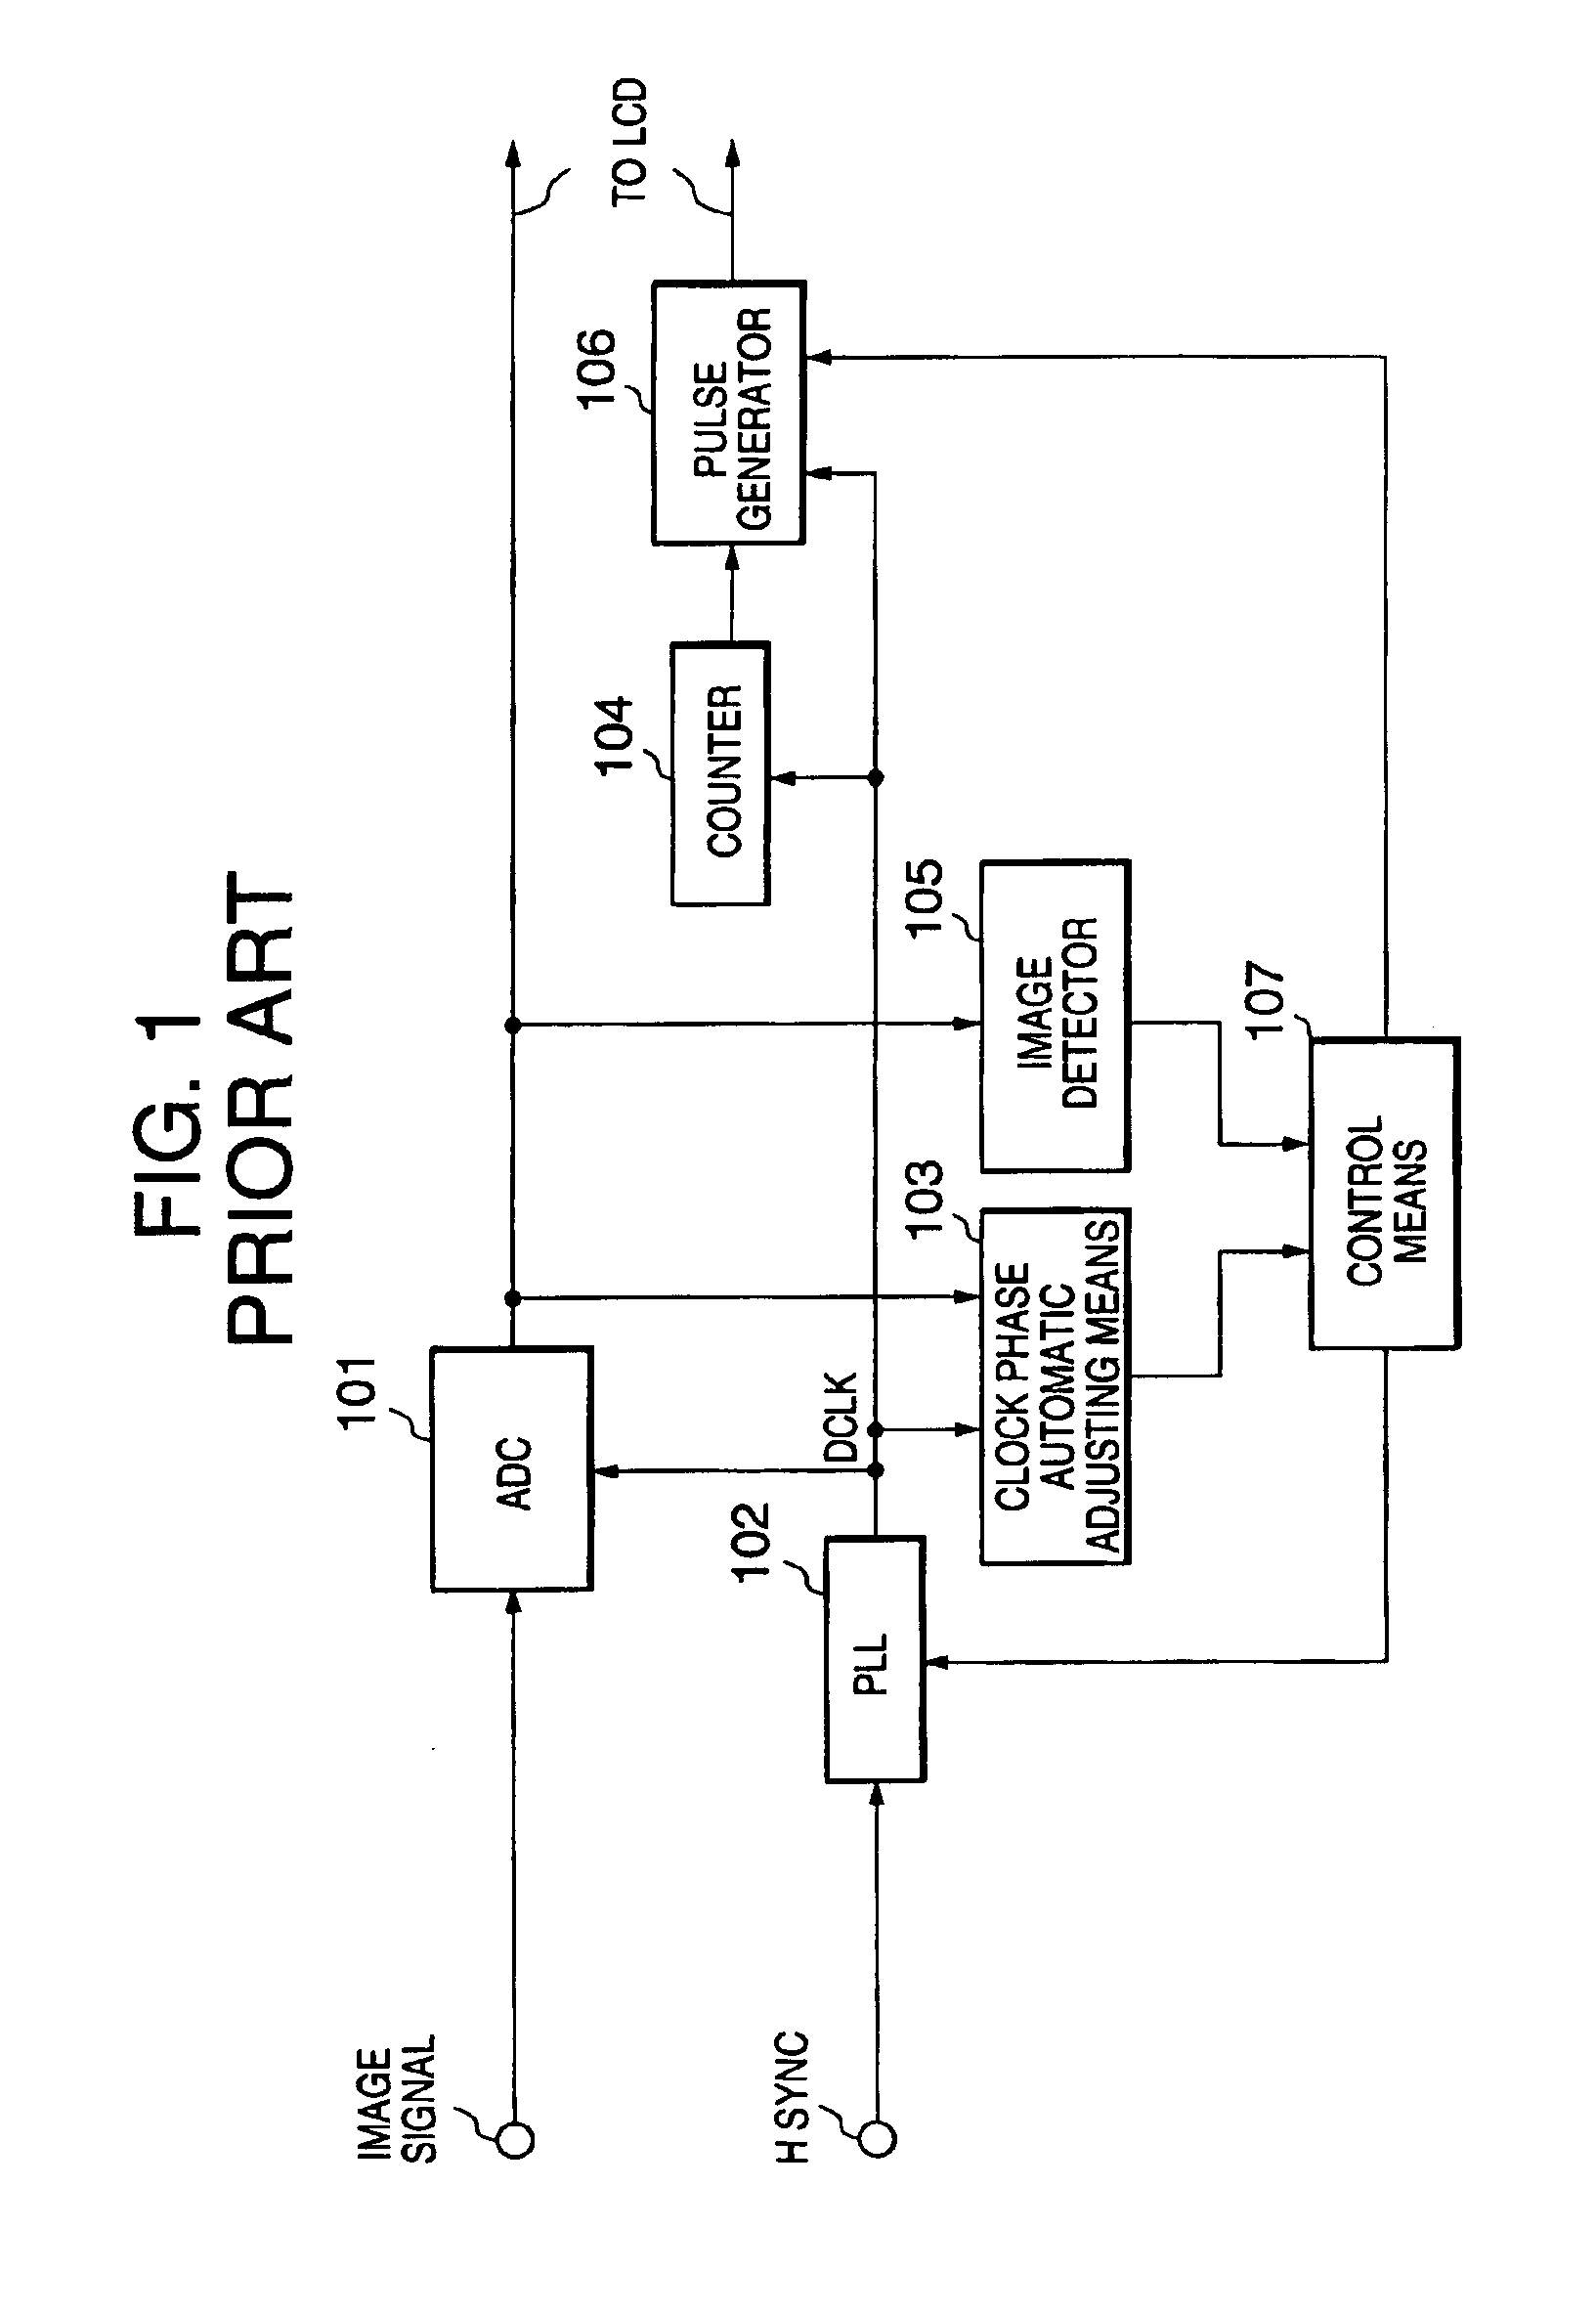 Dot-clock adjustment method and apparatus for a display device, determining correctness of dot-clock frequency from variations in an image characteristic with respect to dot-clock phase